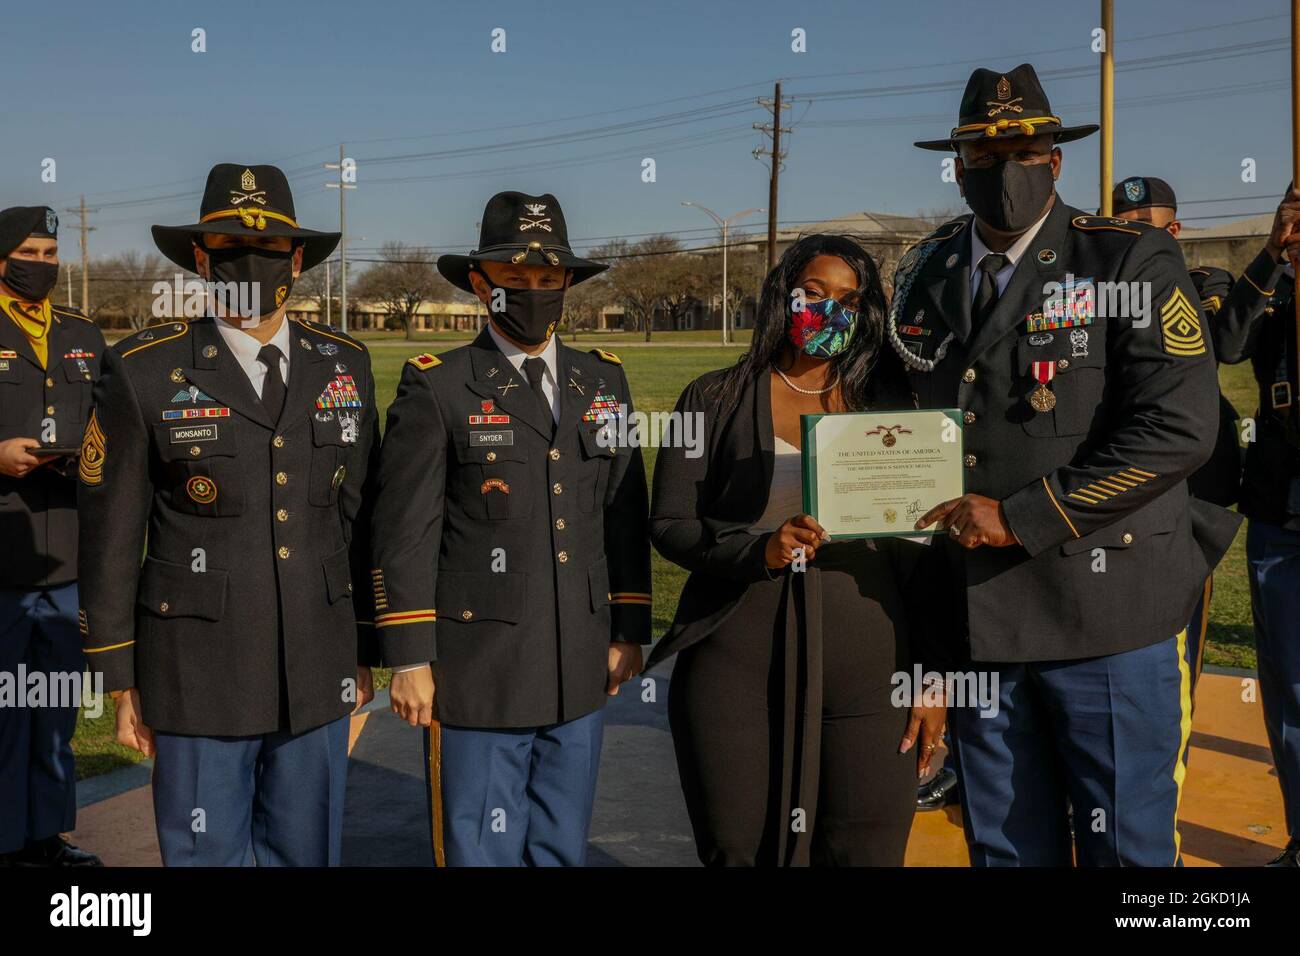 Col. Neil Snyder, 1st Cavalry Division Artillery commander and Command Sgt. Maj. Edgar Monsanto, 1st Cavalry Division Artillery command sergeant major, stand beside First Sergeant Paul E. Joseph and his wife, Veronica, during the division's Distinguished Service Recognition Ceremony on Cooper Field, Fort Hood, TX, March 17, 2021. Joseph received the Meritorious Service Medal for his more than 21 years of service. Stock Photo